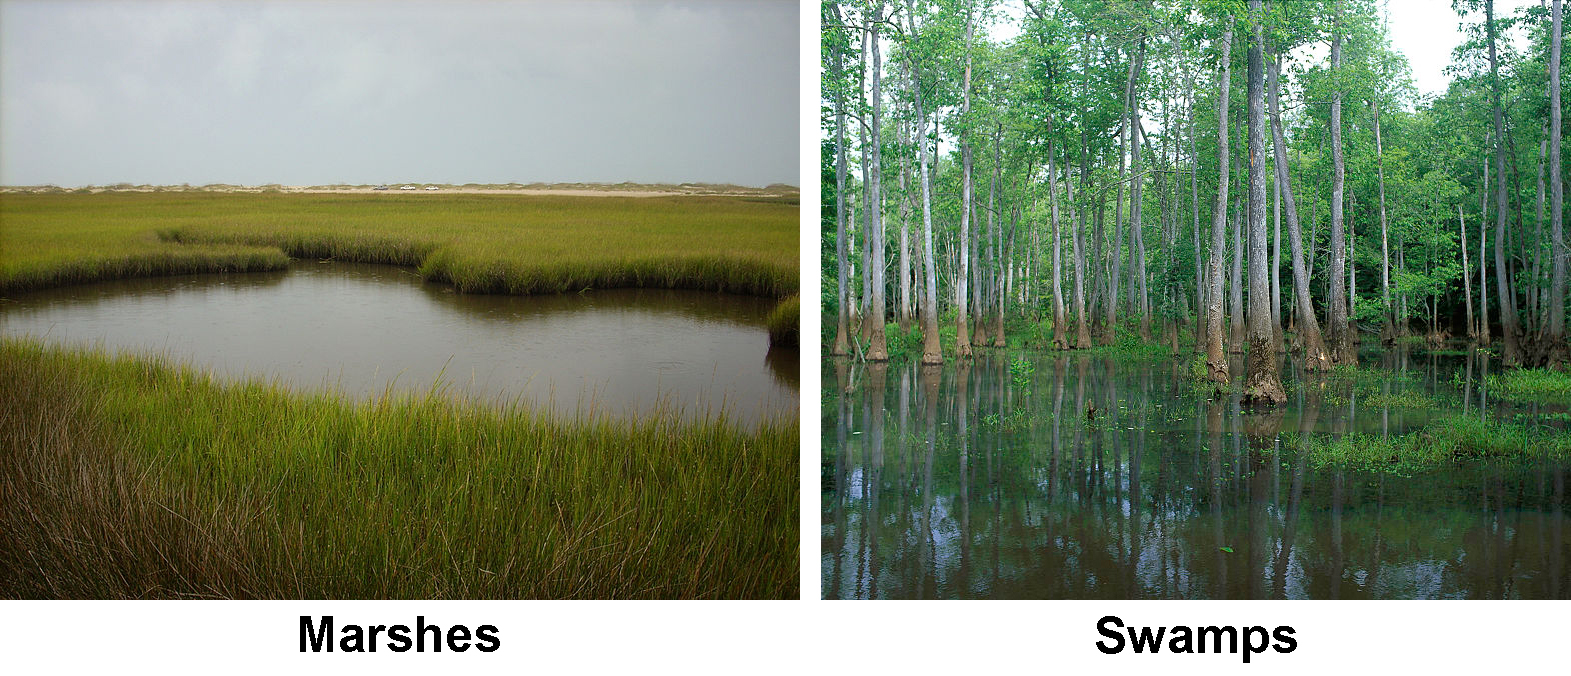 Marshes and swamps are both types of wetlands. A marsh has low shrubs and grasses while a swamp has trees as well.